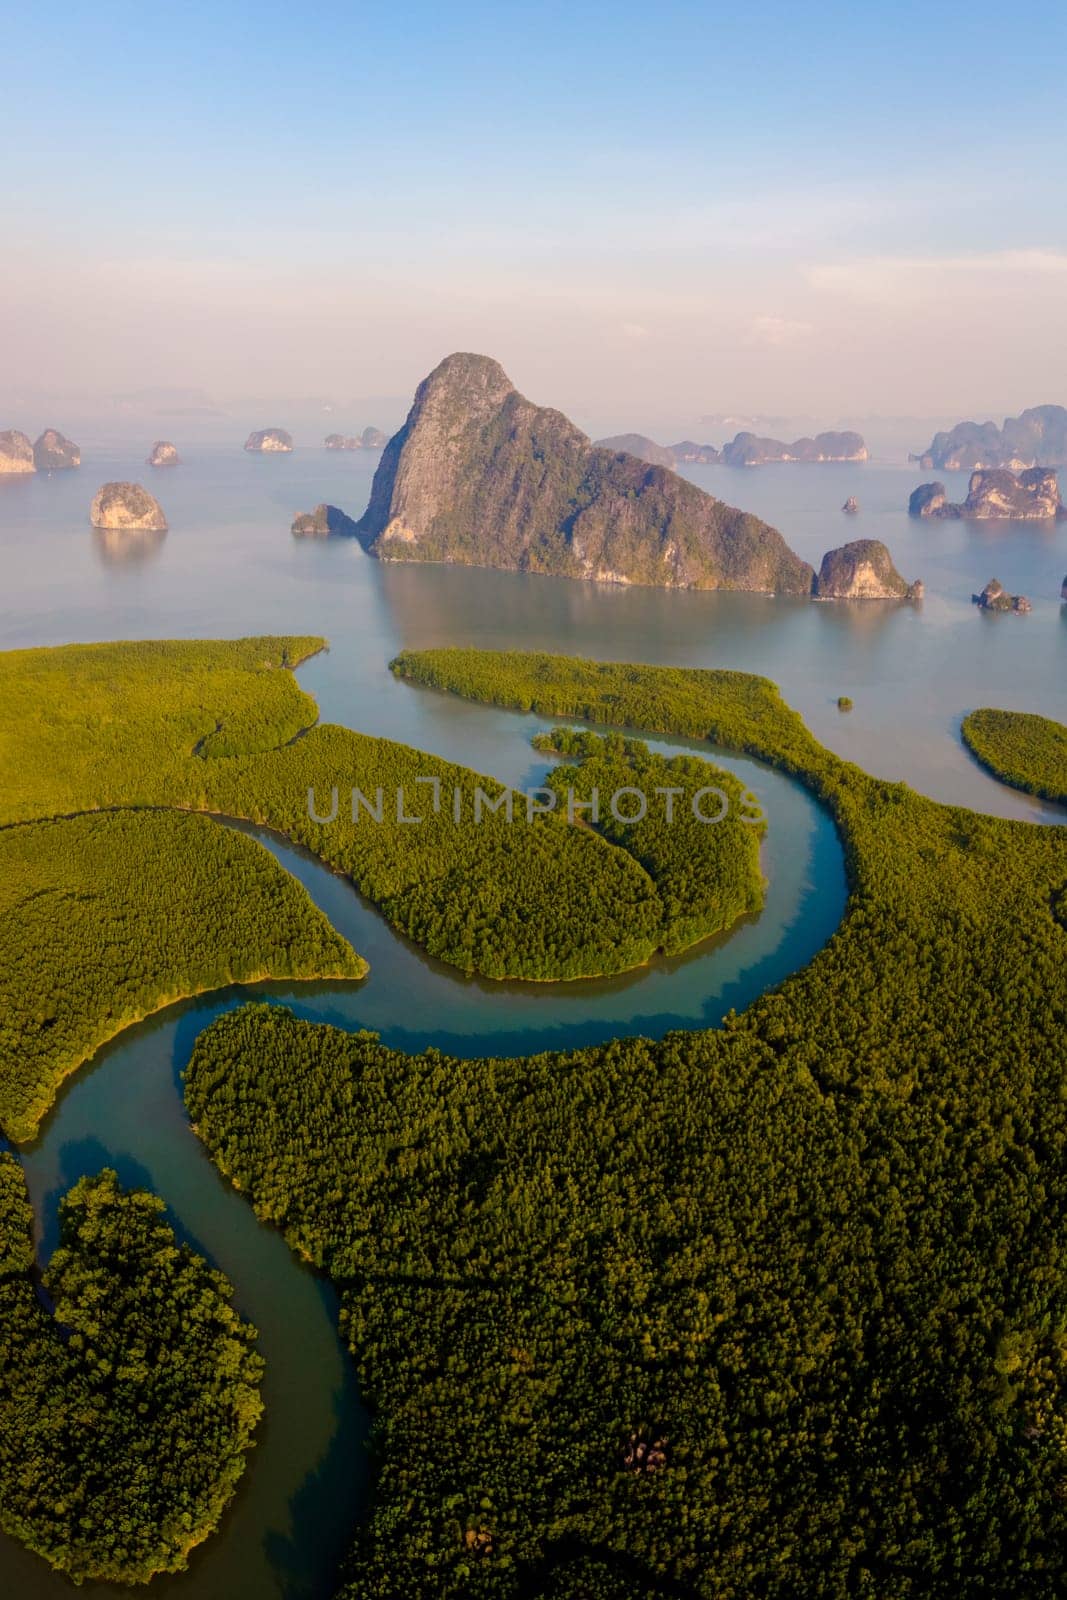 Sametnangshe viewpoint of mountains in Phangnga Bay with mangrove forest in the Andaman Sea with evening twilight sky, travel destination in Phangnga, Thailand